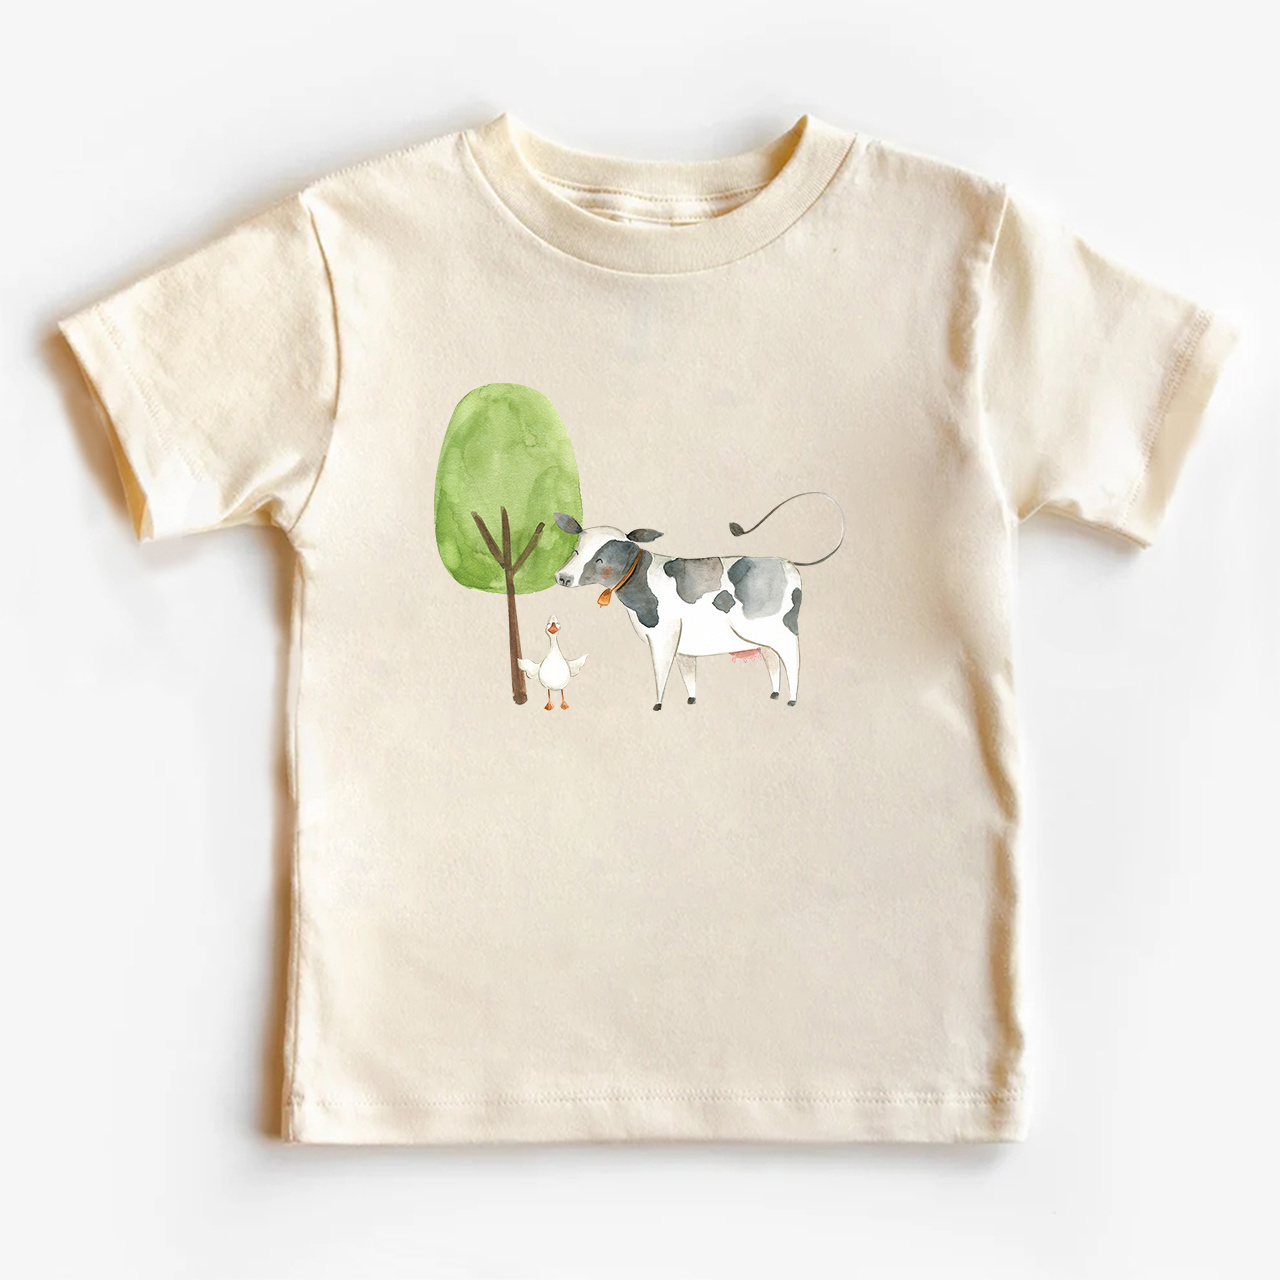 The Story Of the Farm Cow And The Gosling Shirt For Kids